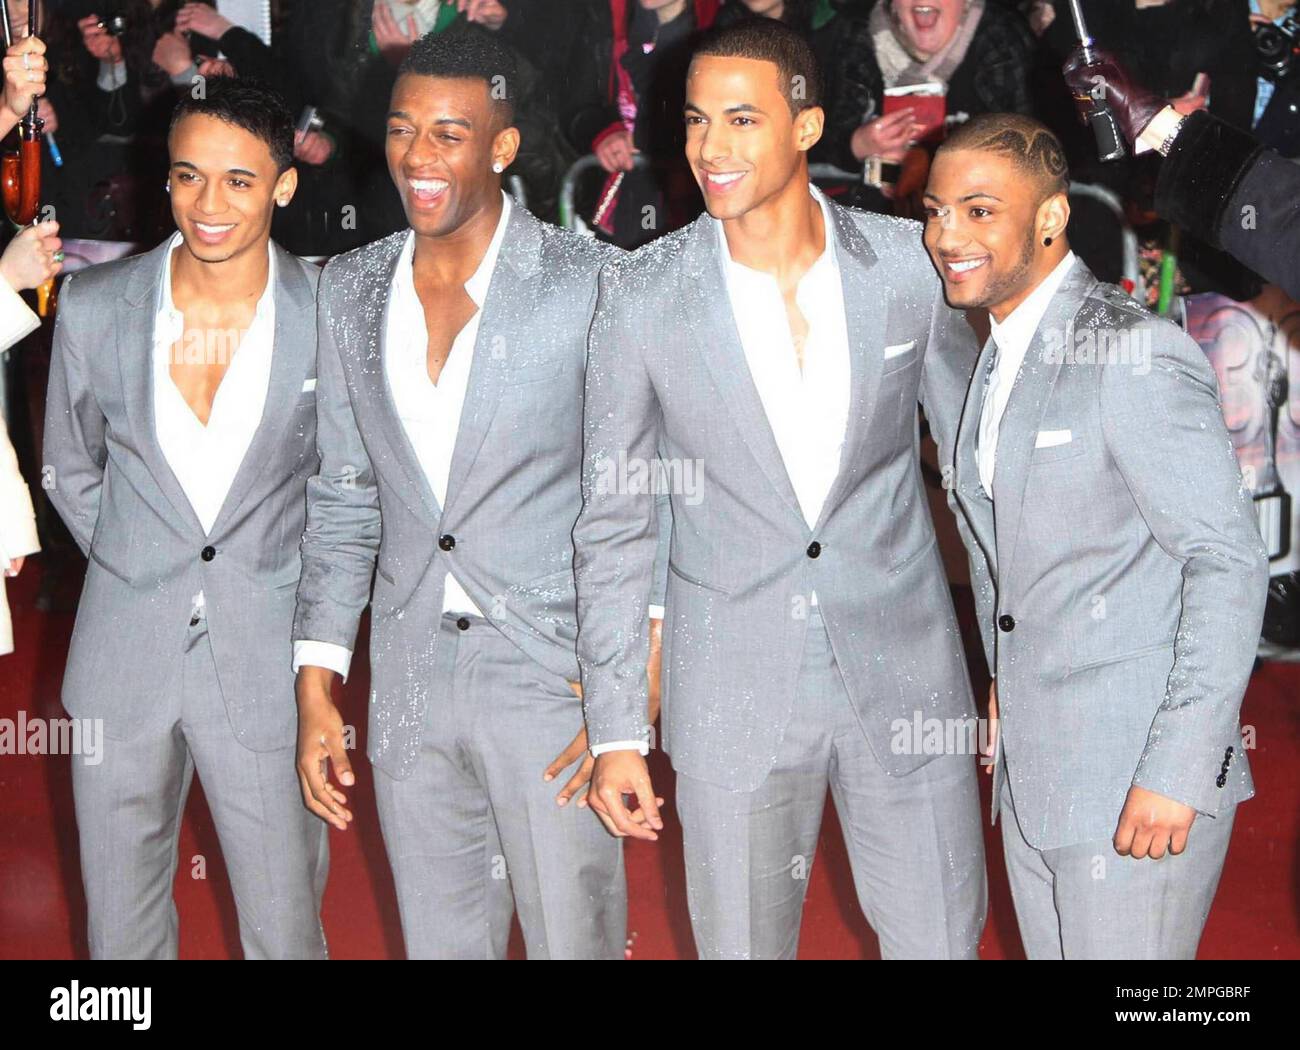 Aston Merrygold, Marvin Humes, Jonathan (JB) Gill and Oritse Williams of JLS (Jack the Lad Swing) walk the red carpet at The Brit Awards 2010 at Earls Court.  London, UK. 2/16/2010.    . Stock Photo